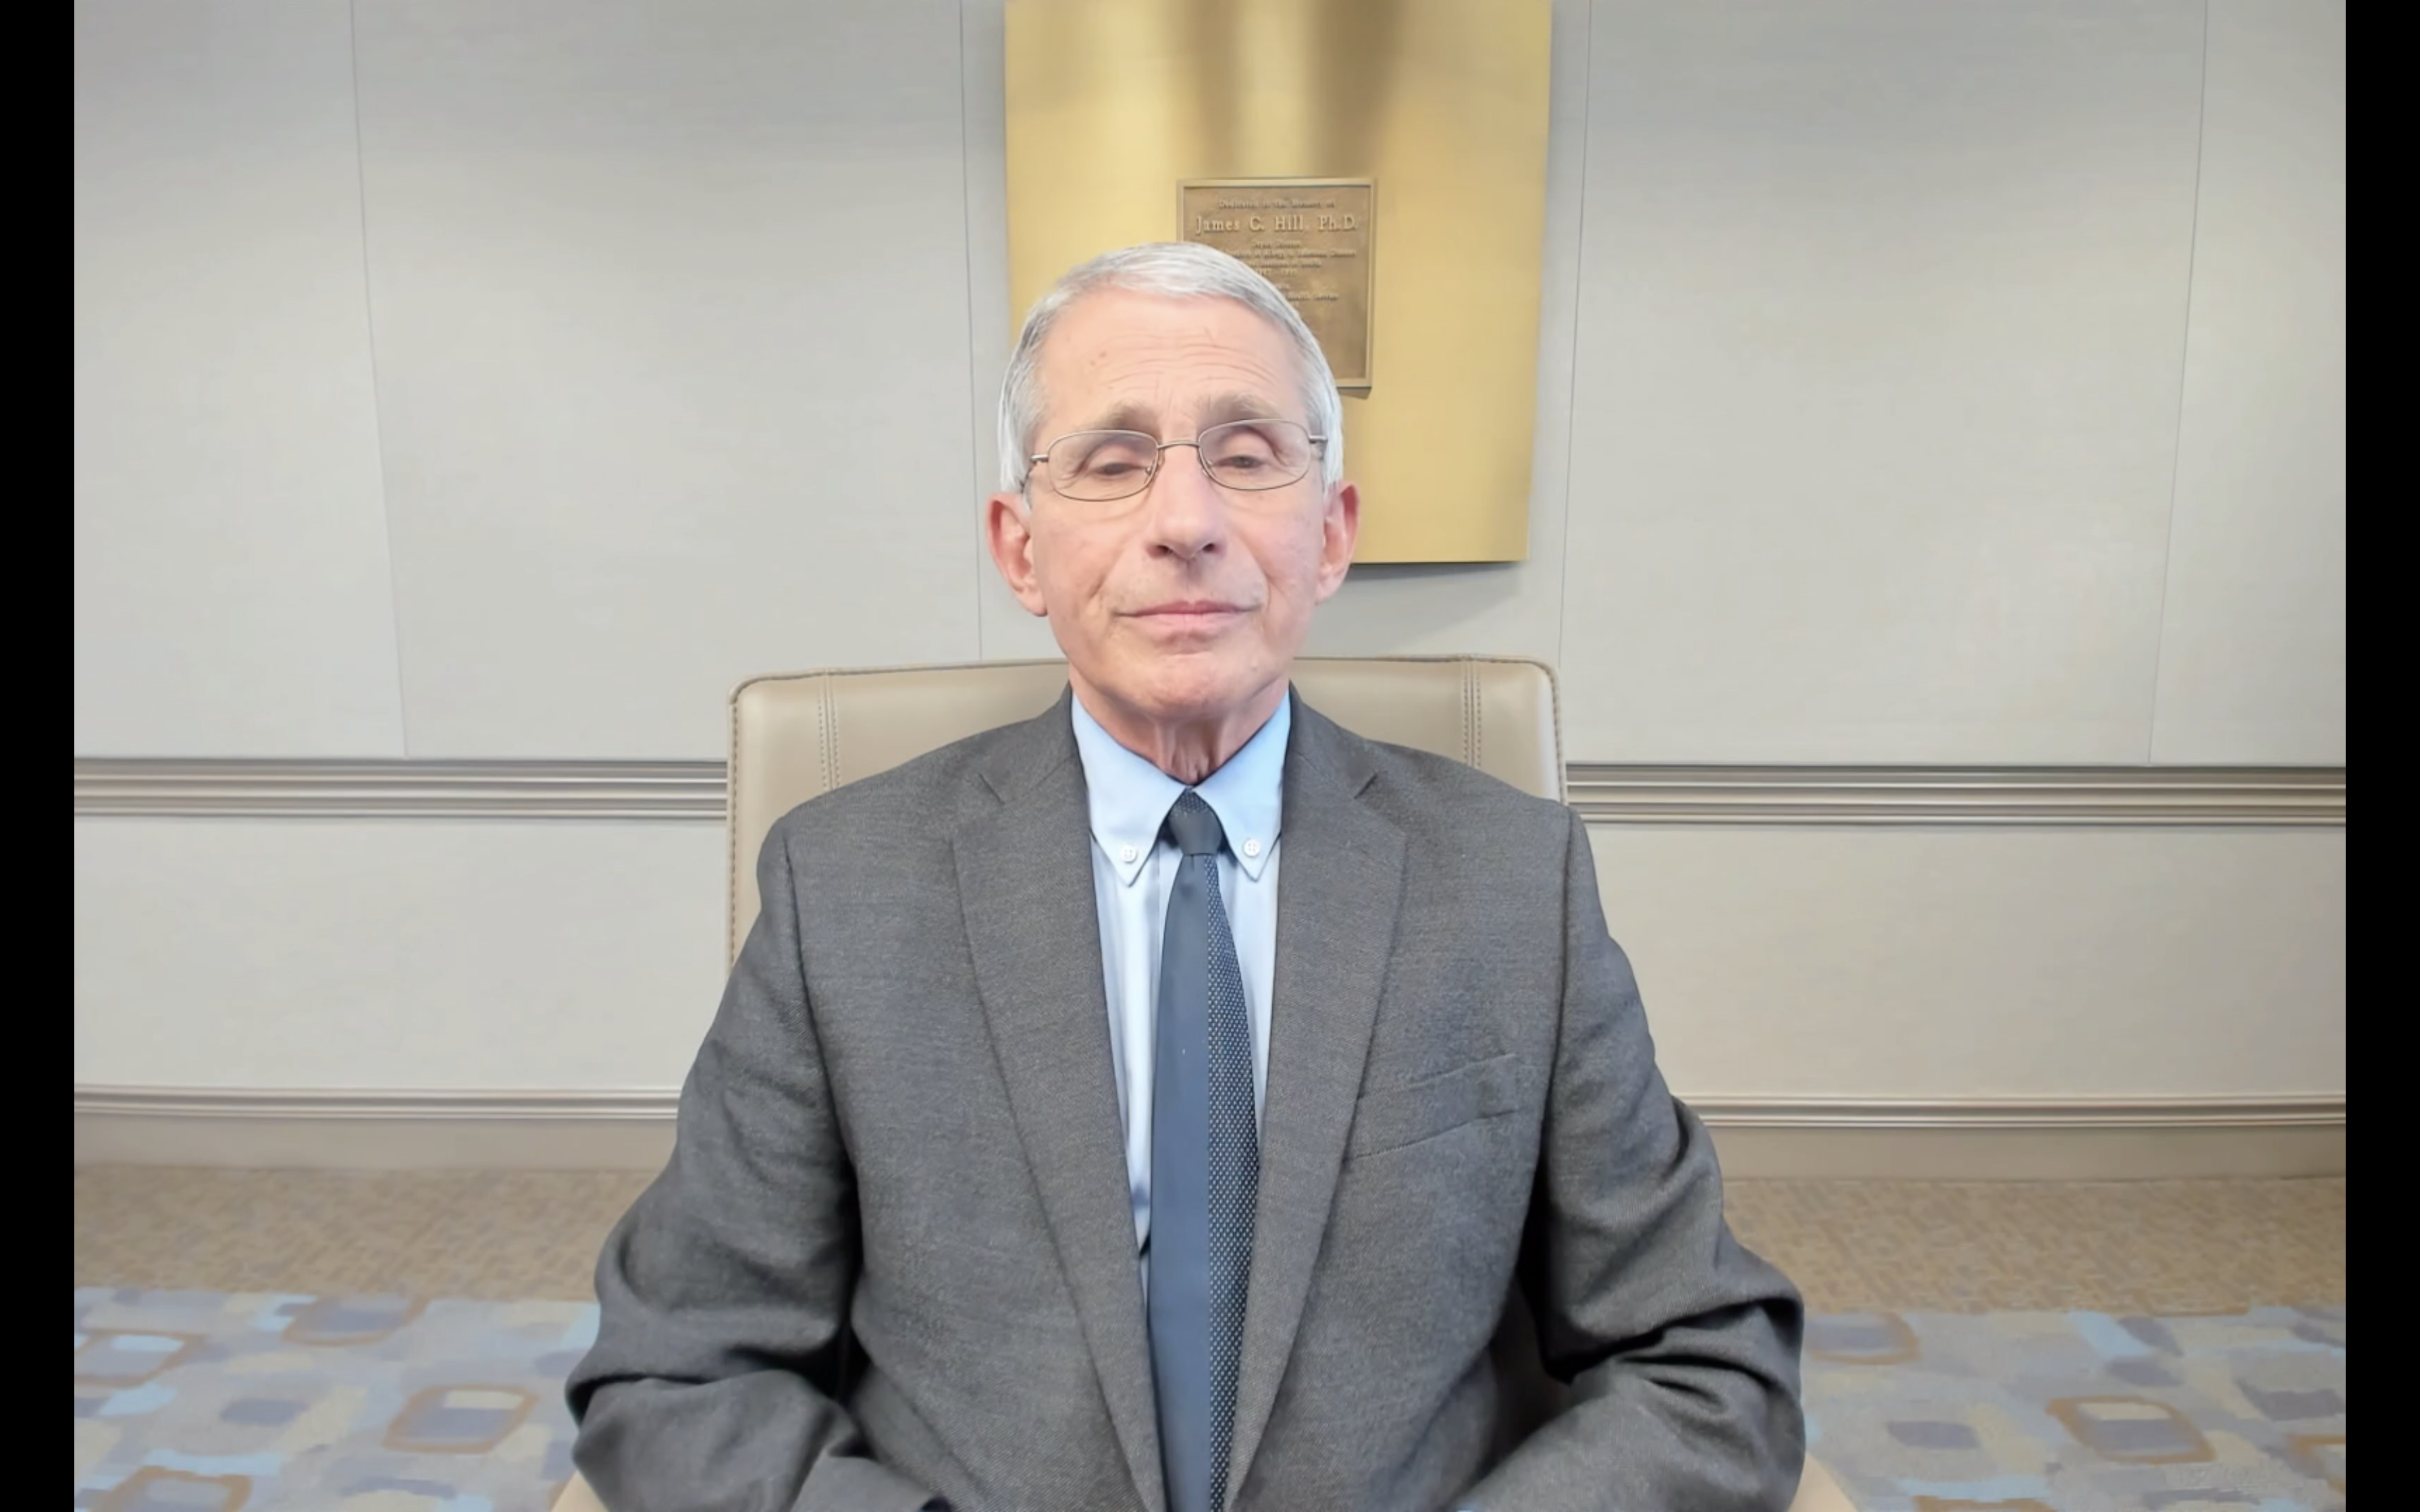 Screenshot of Dr. Fauci seated